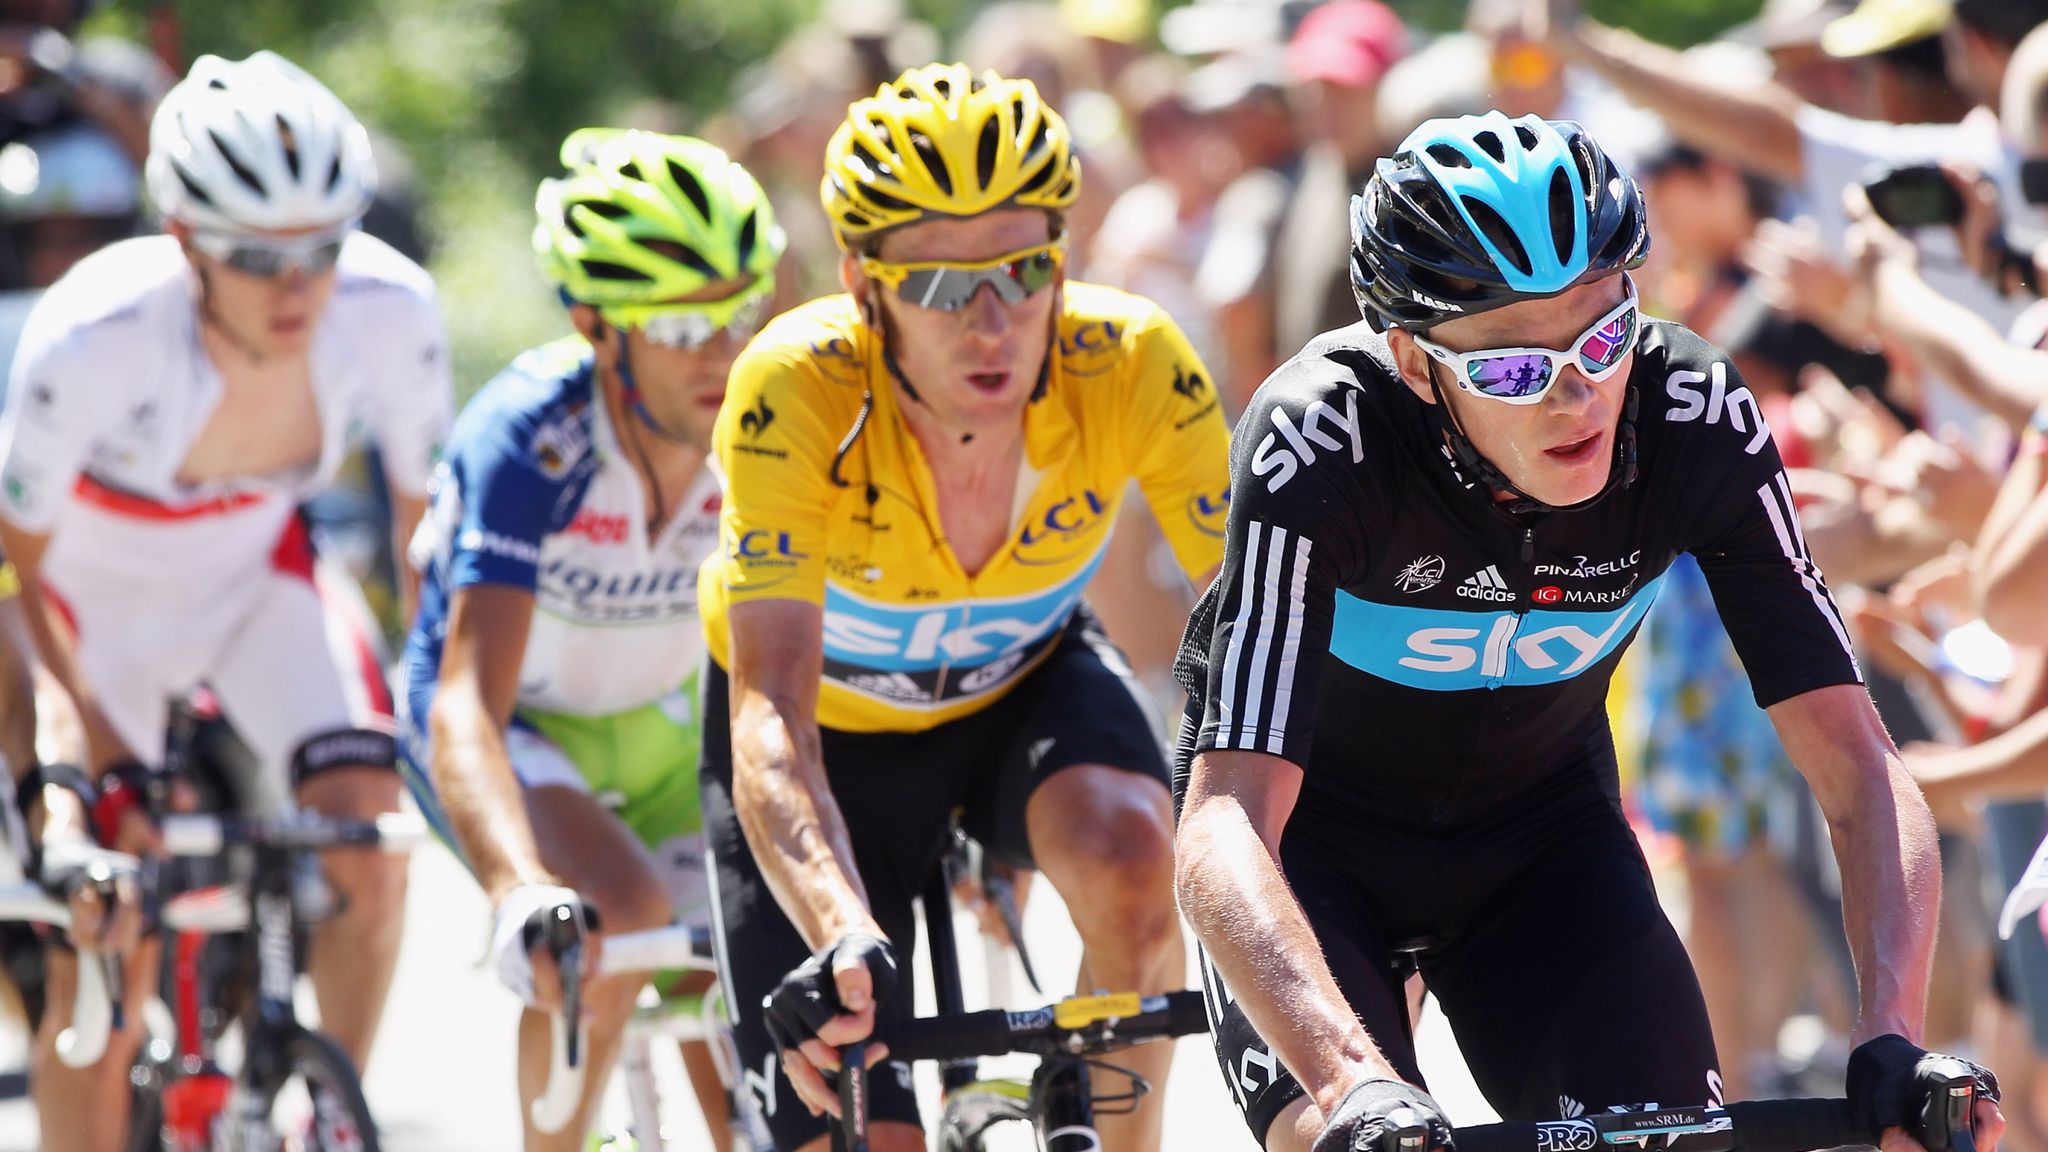 Chris Froome and Wiggins' data leaked | Cycling News | Sky Sports